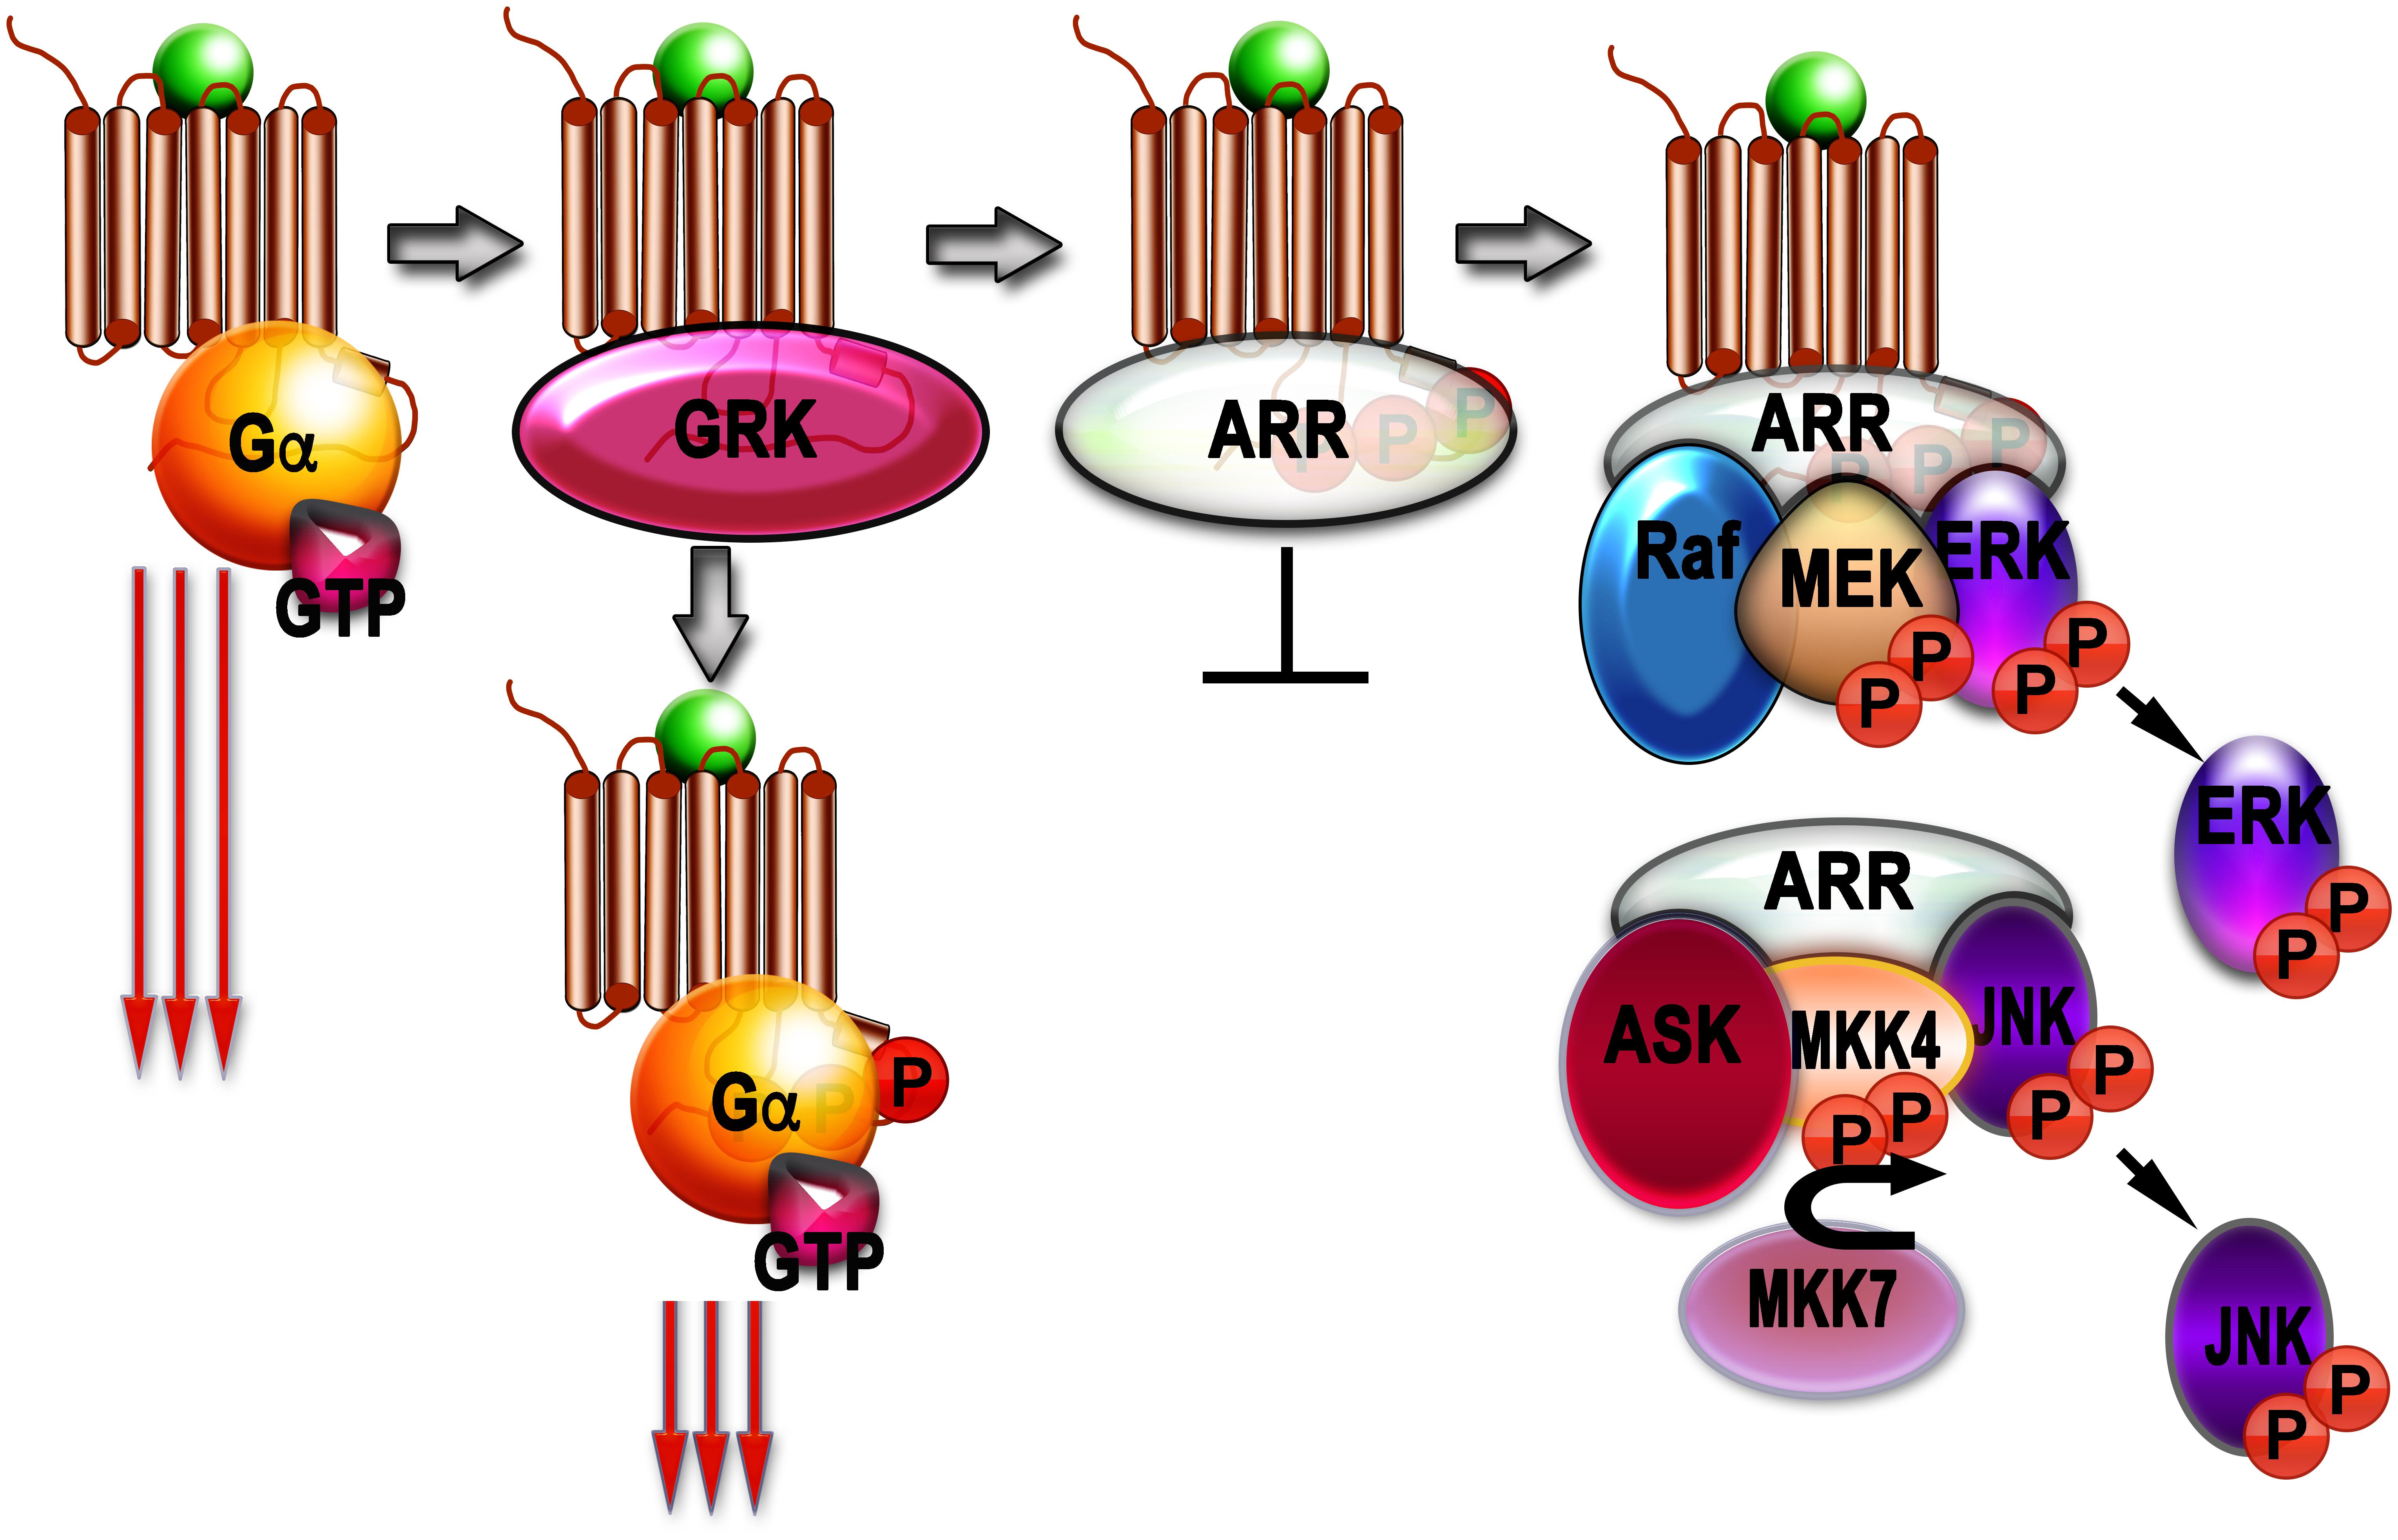 Frontiers Gpcr Signaling Regulation The Role Of Grks And Arrestins Pharmacology